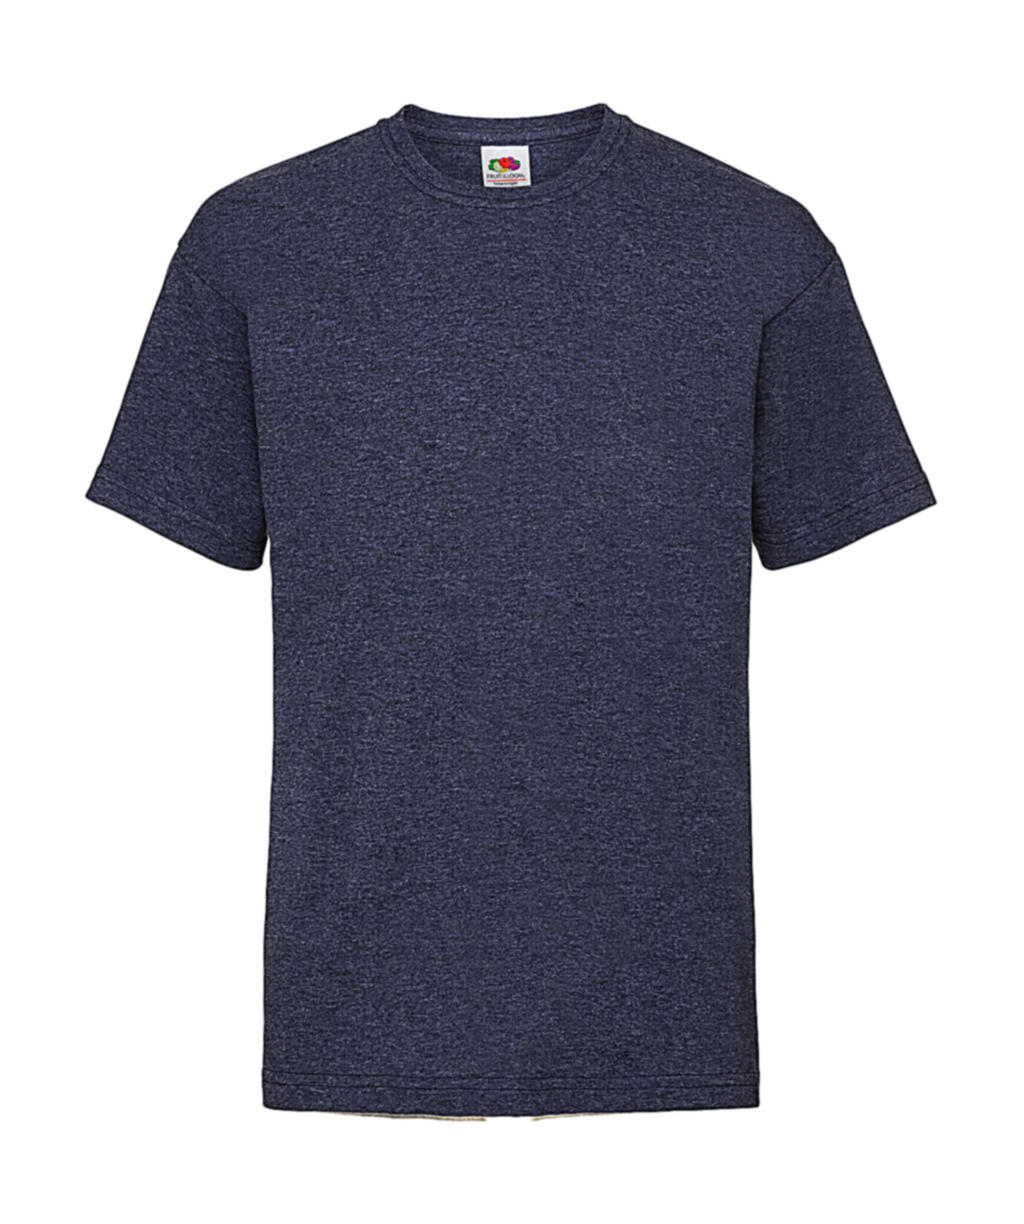  Kids Valueweight T in Farbe Heather Navy